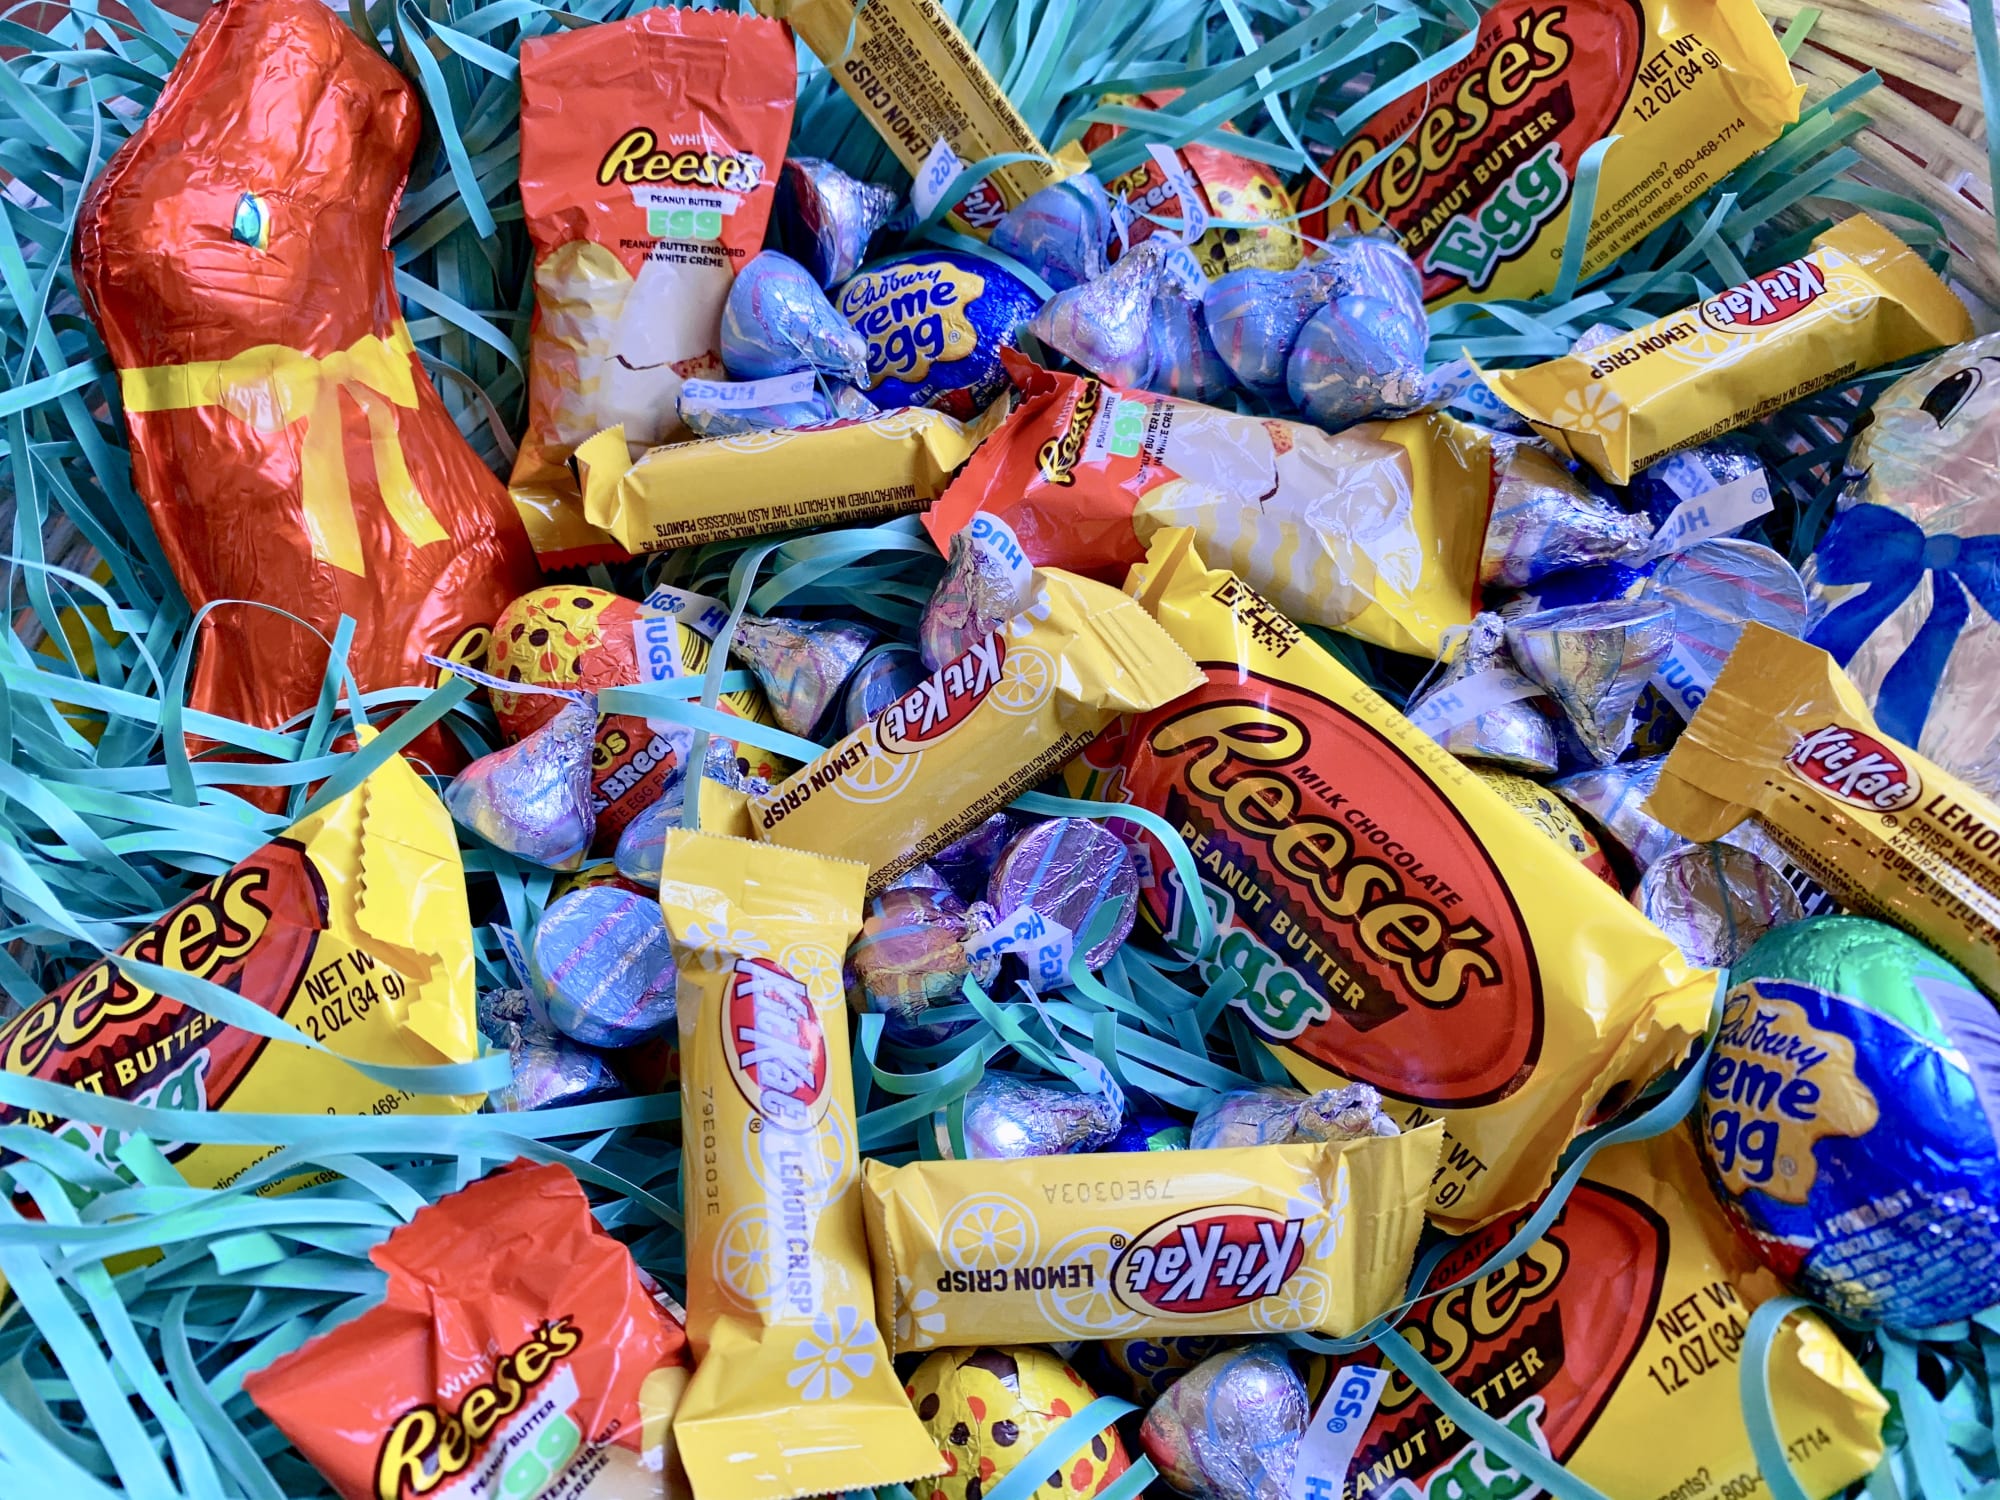 What's the best Easter candy and chocolate? Ranking Hershey's offerings